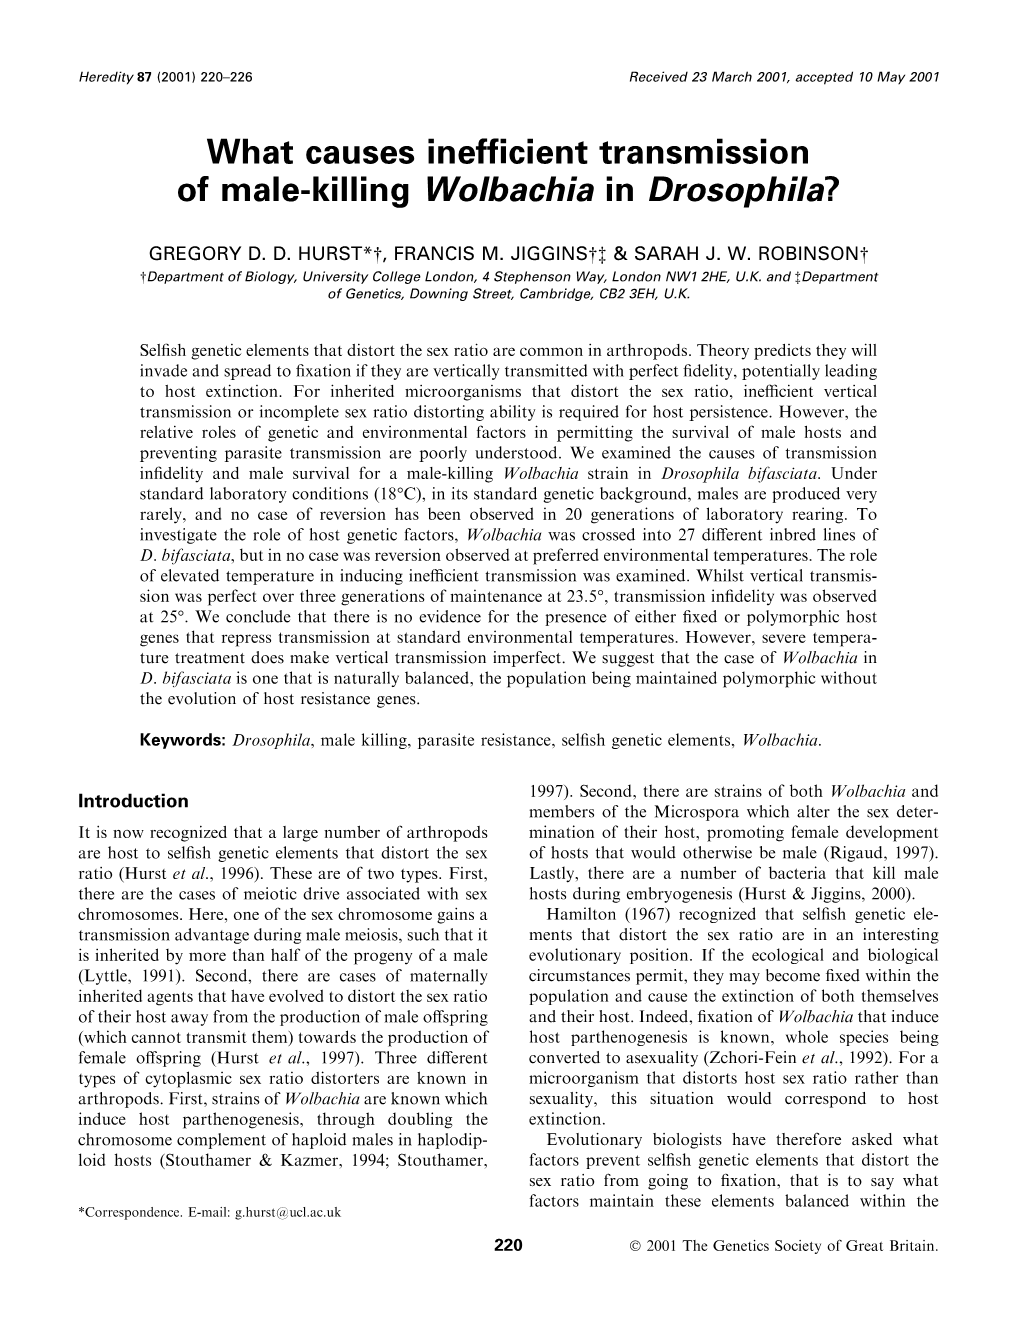 What Causes Inefficient Transmission of Male-Killing Wolbachia in Drosophila?